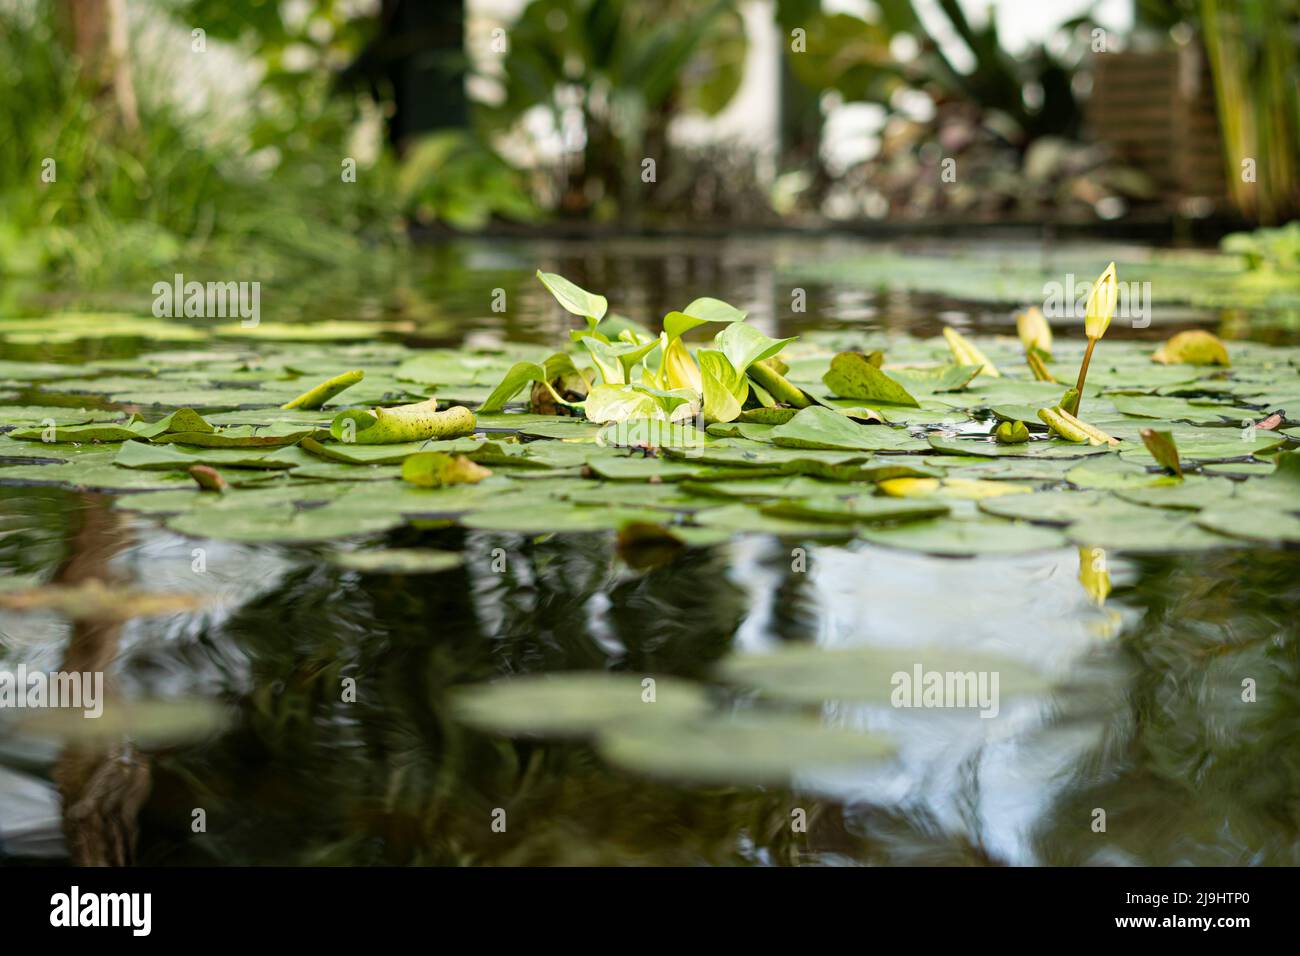 Green leaves of water lilies floating on pond Stock Photo